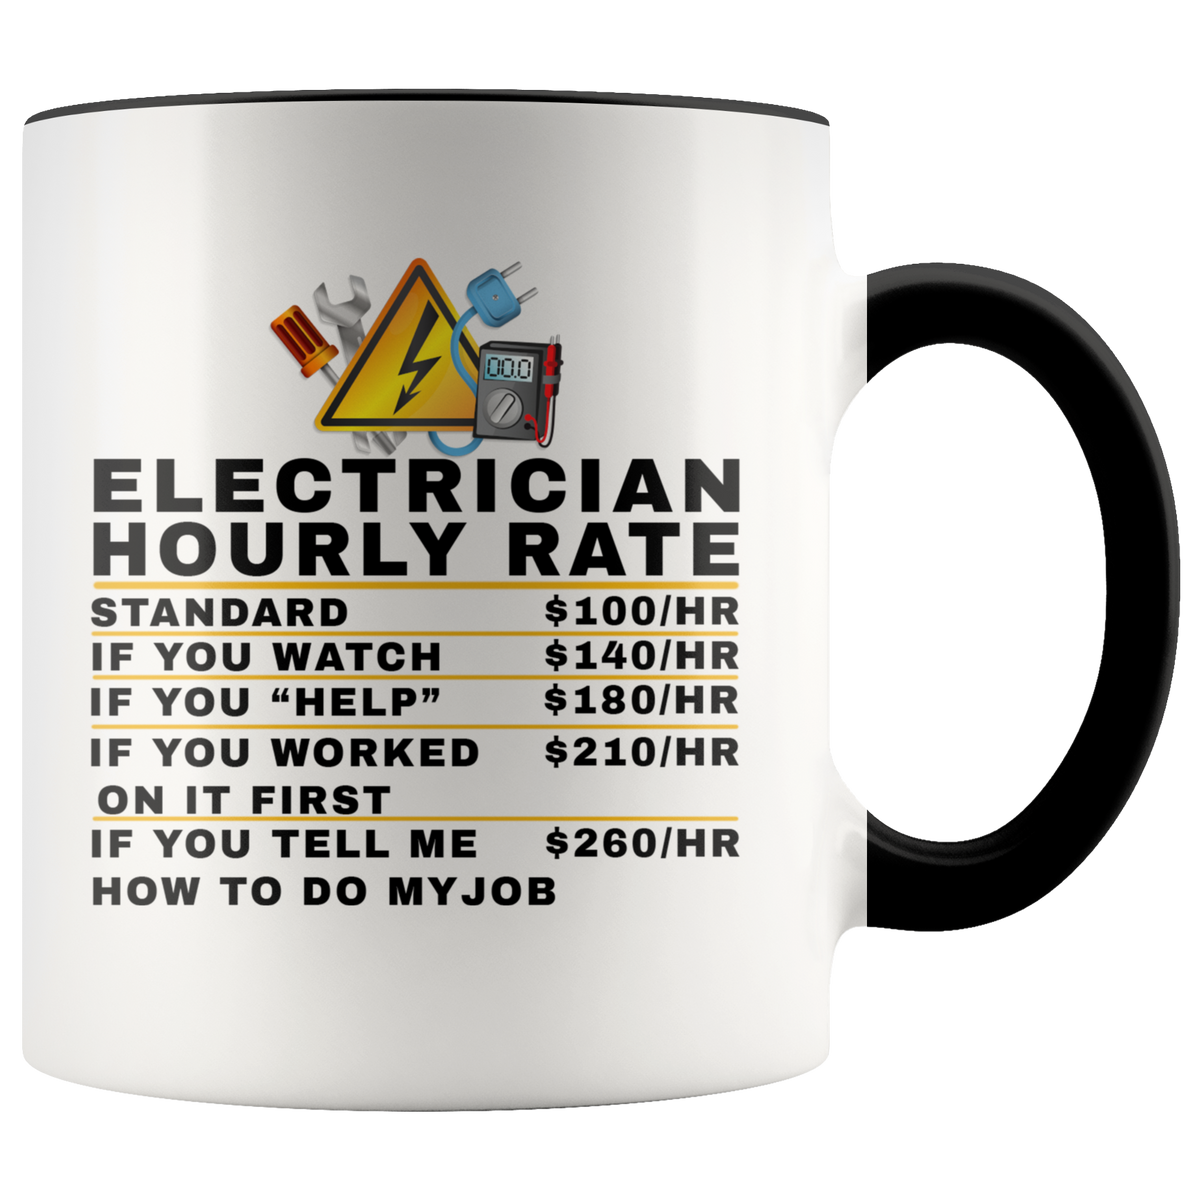 Funny Electrician Mug Gift - Electrician Hourly Rate Accent Coffee Mug 11oz (black)